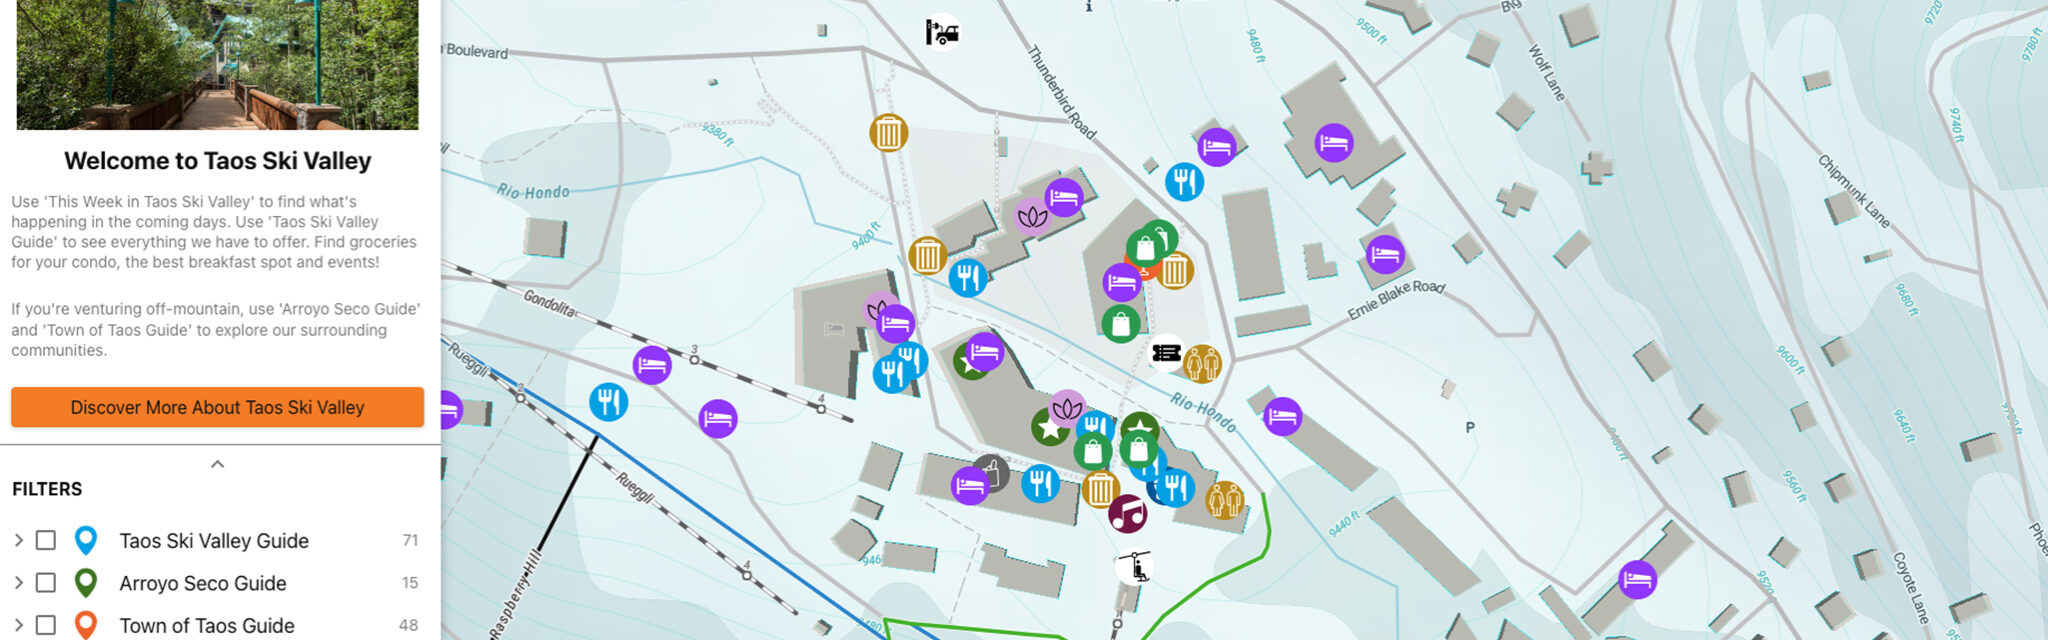 A graphical interface of an interactive map.